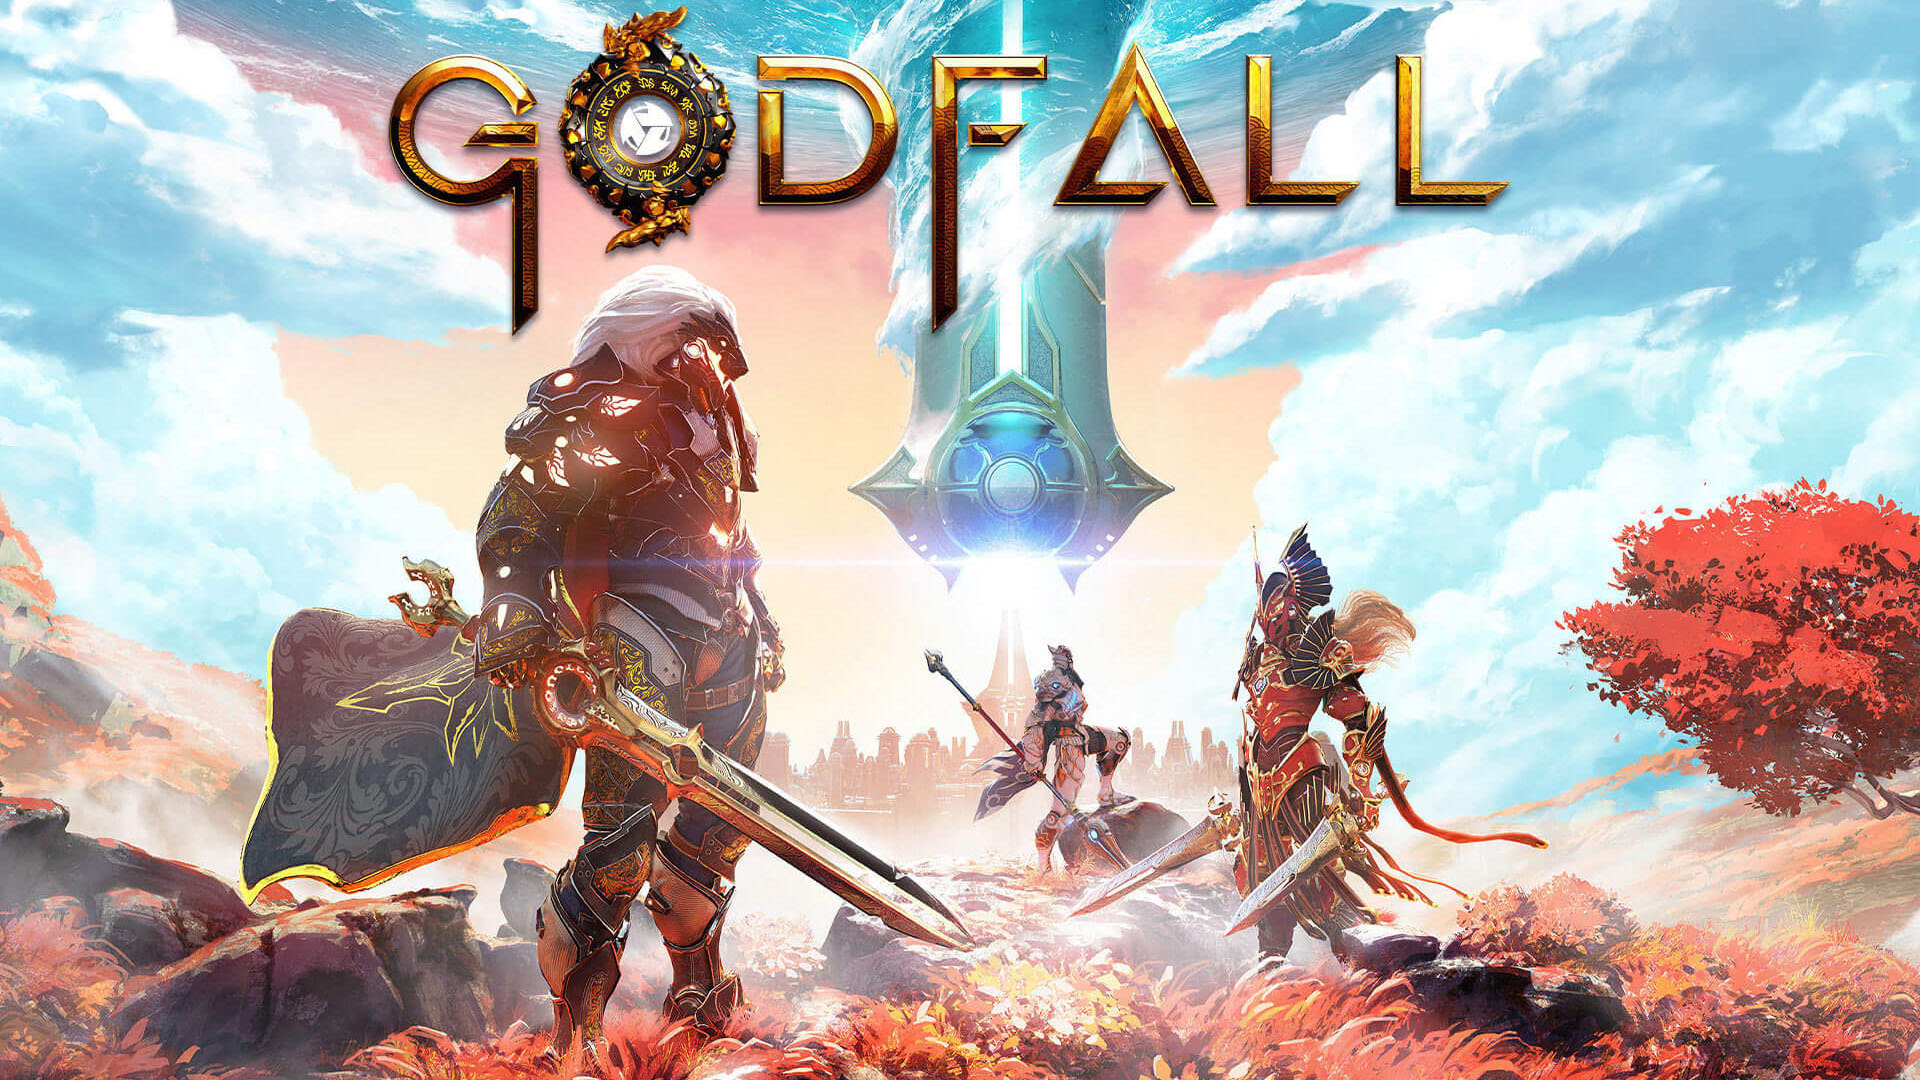 Godfall is coming to Xbox and Steam with new Ultimate Edition